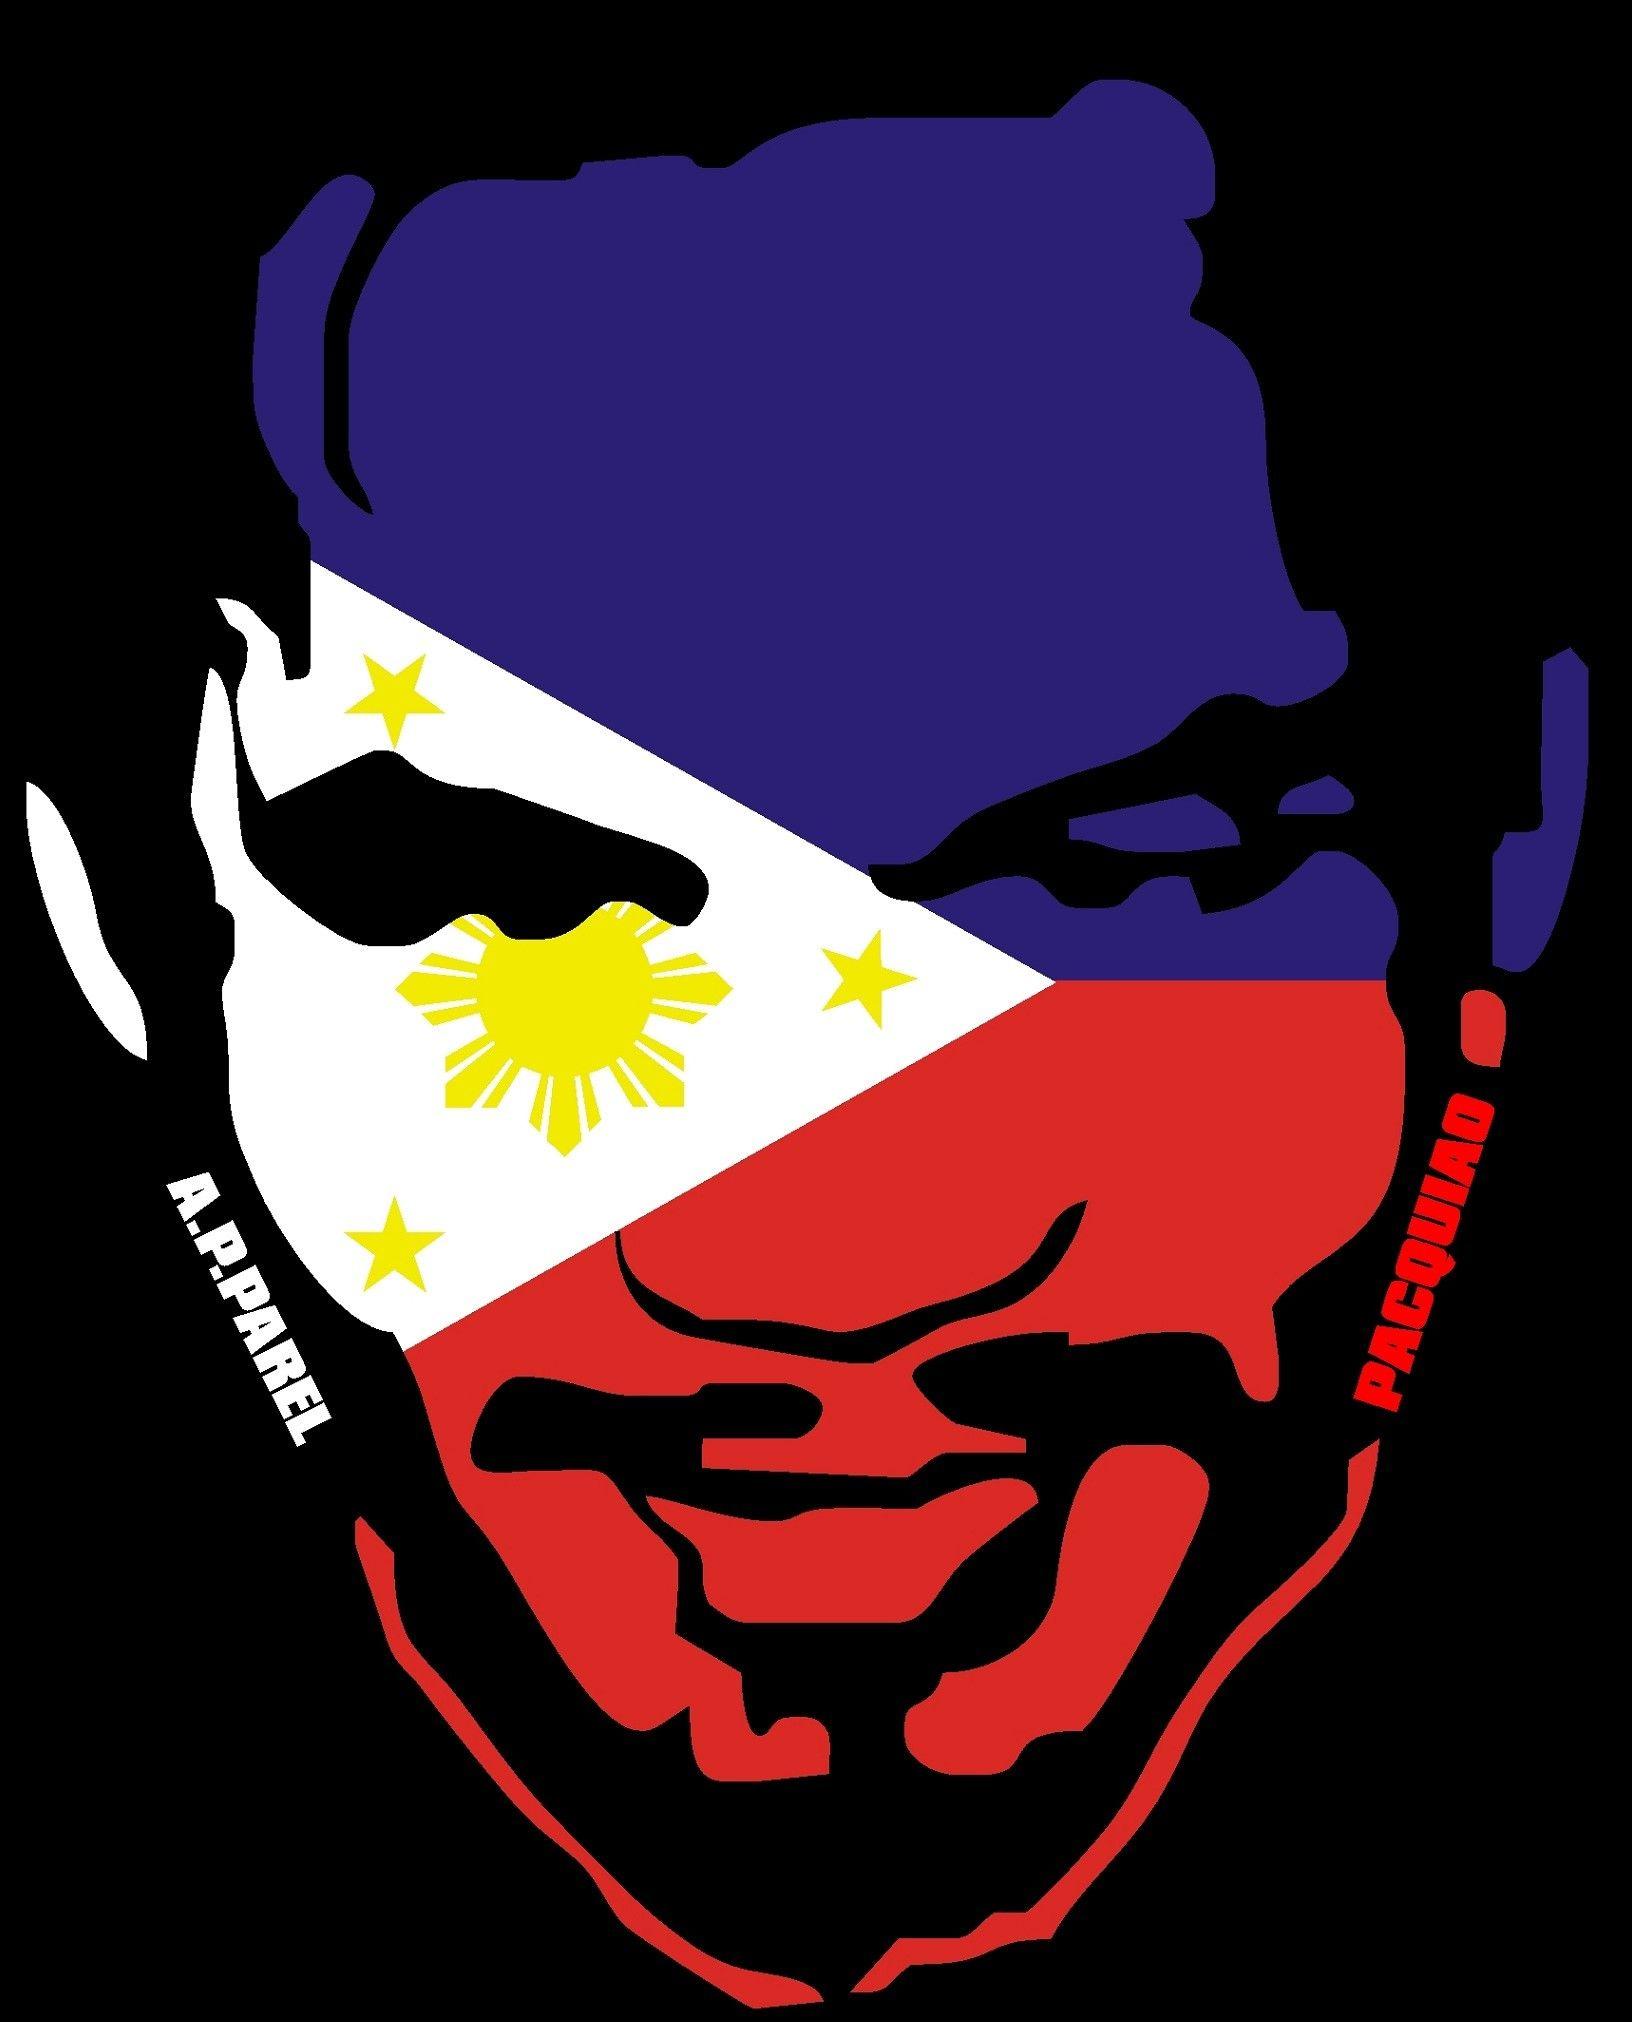 Philippine Flag Wallpaper For iPhone 6 Labzada Wallpaper